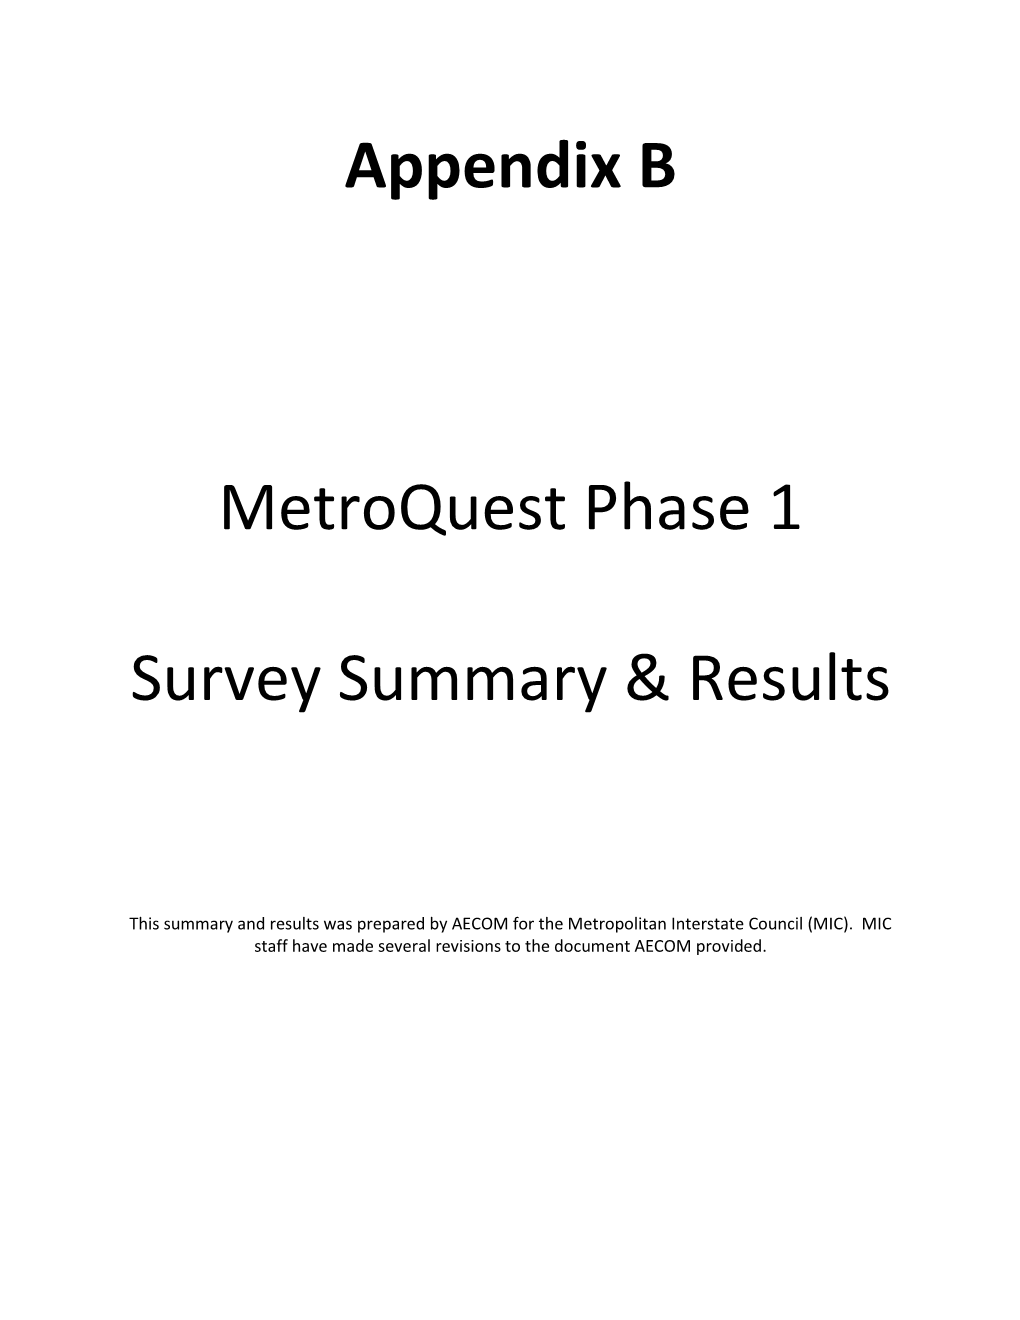 Appendix B Metroquest Phase 1 Survey Summary & Results